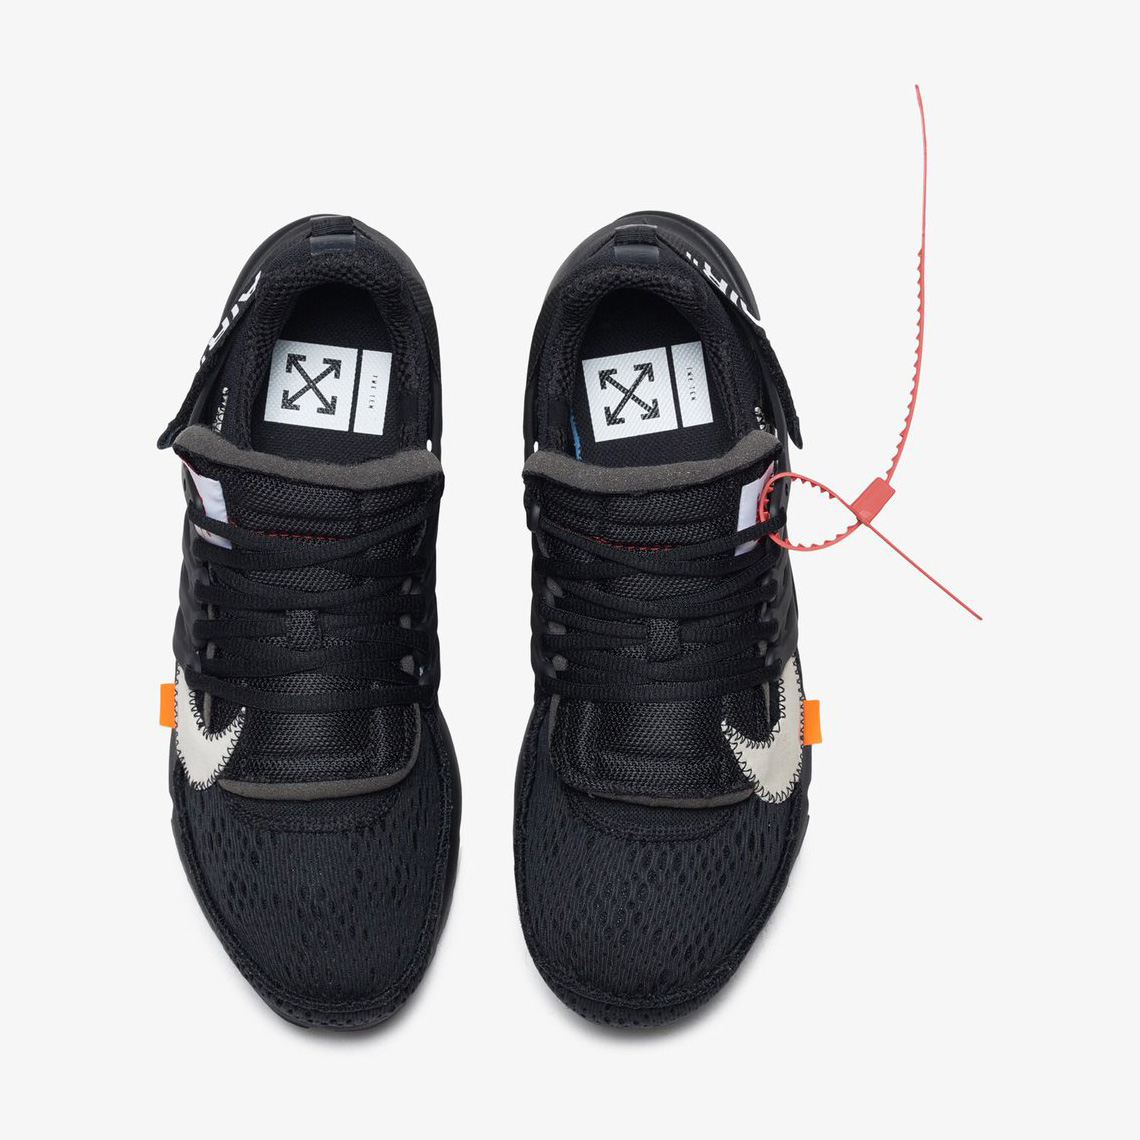 See Official Images of the OFF-WHITE™ x Nike Presto in Black and White ...